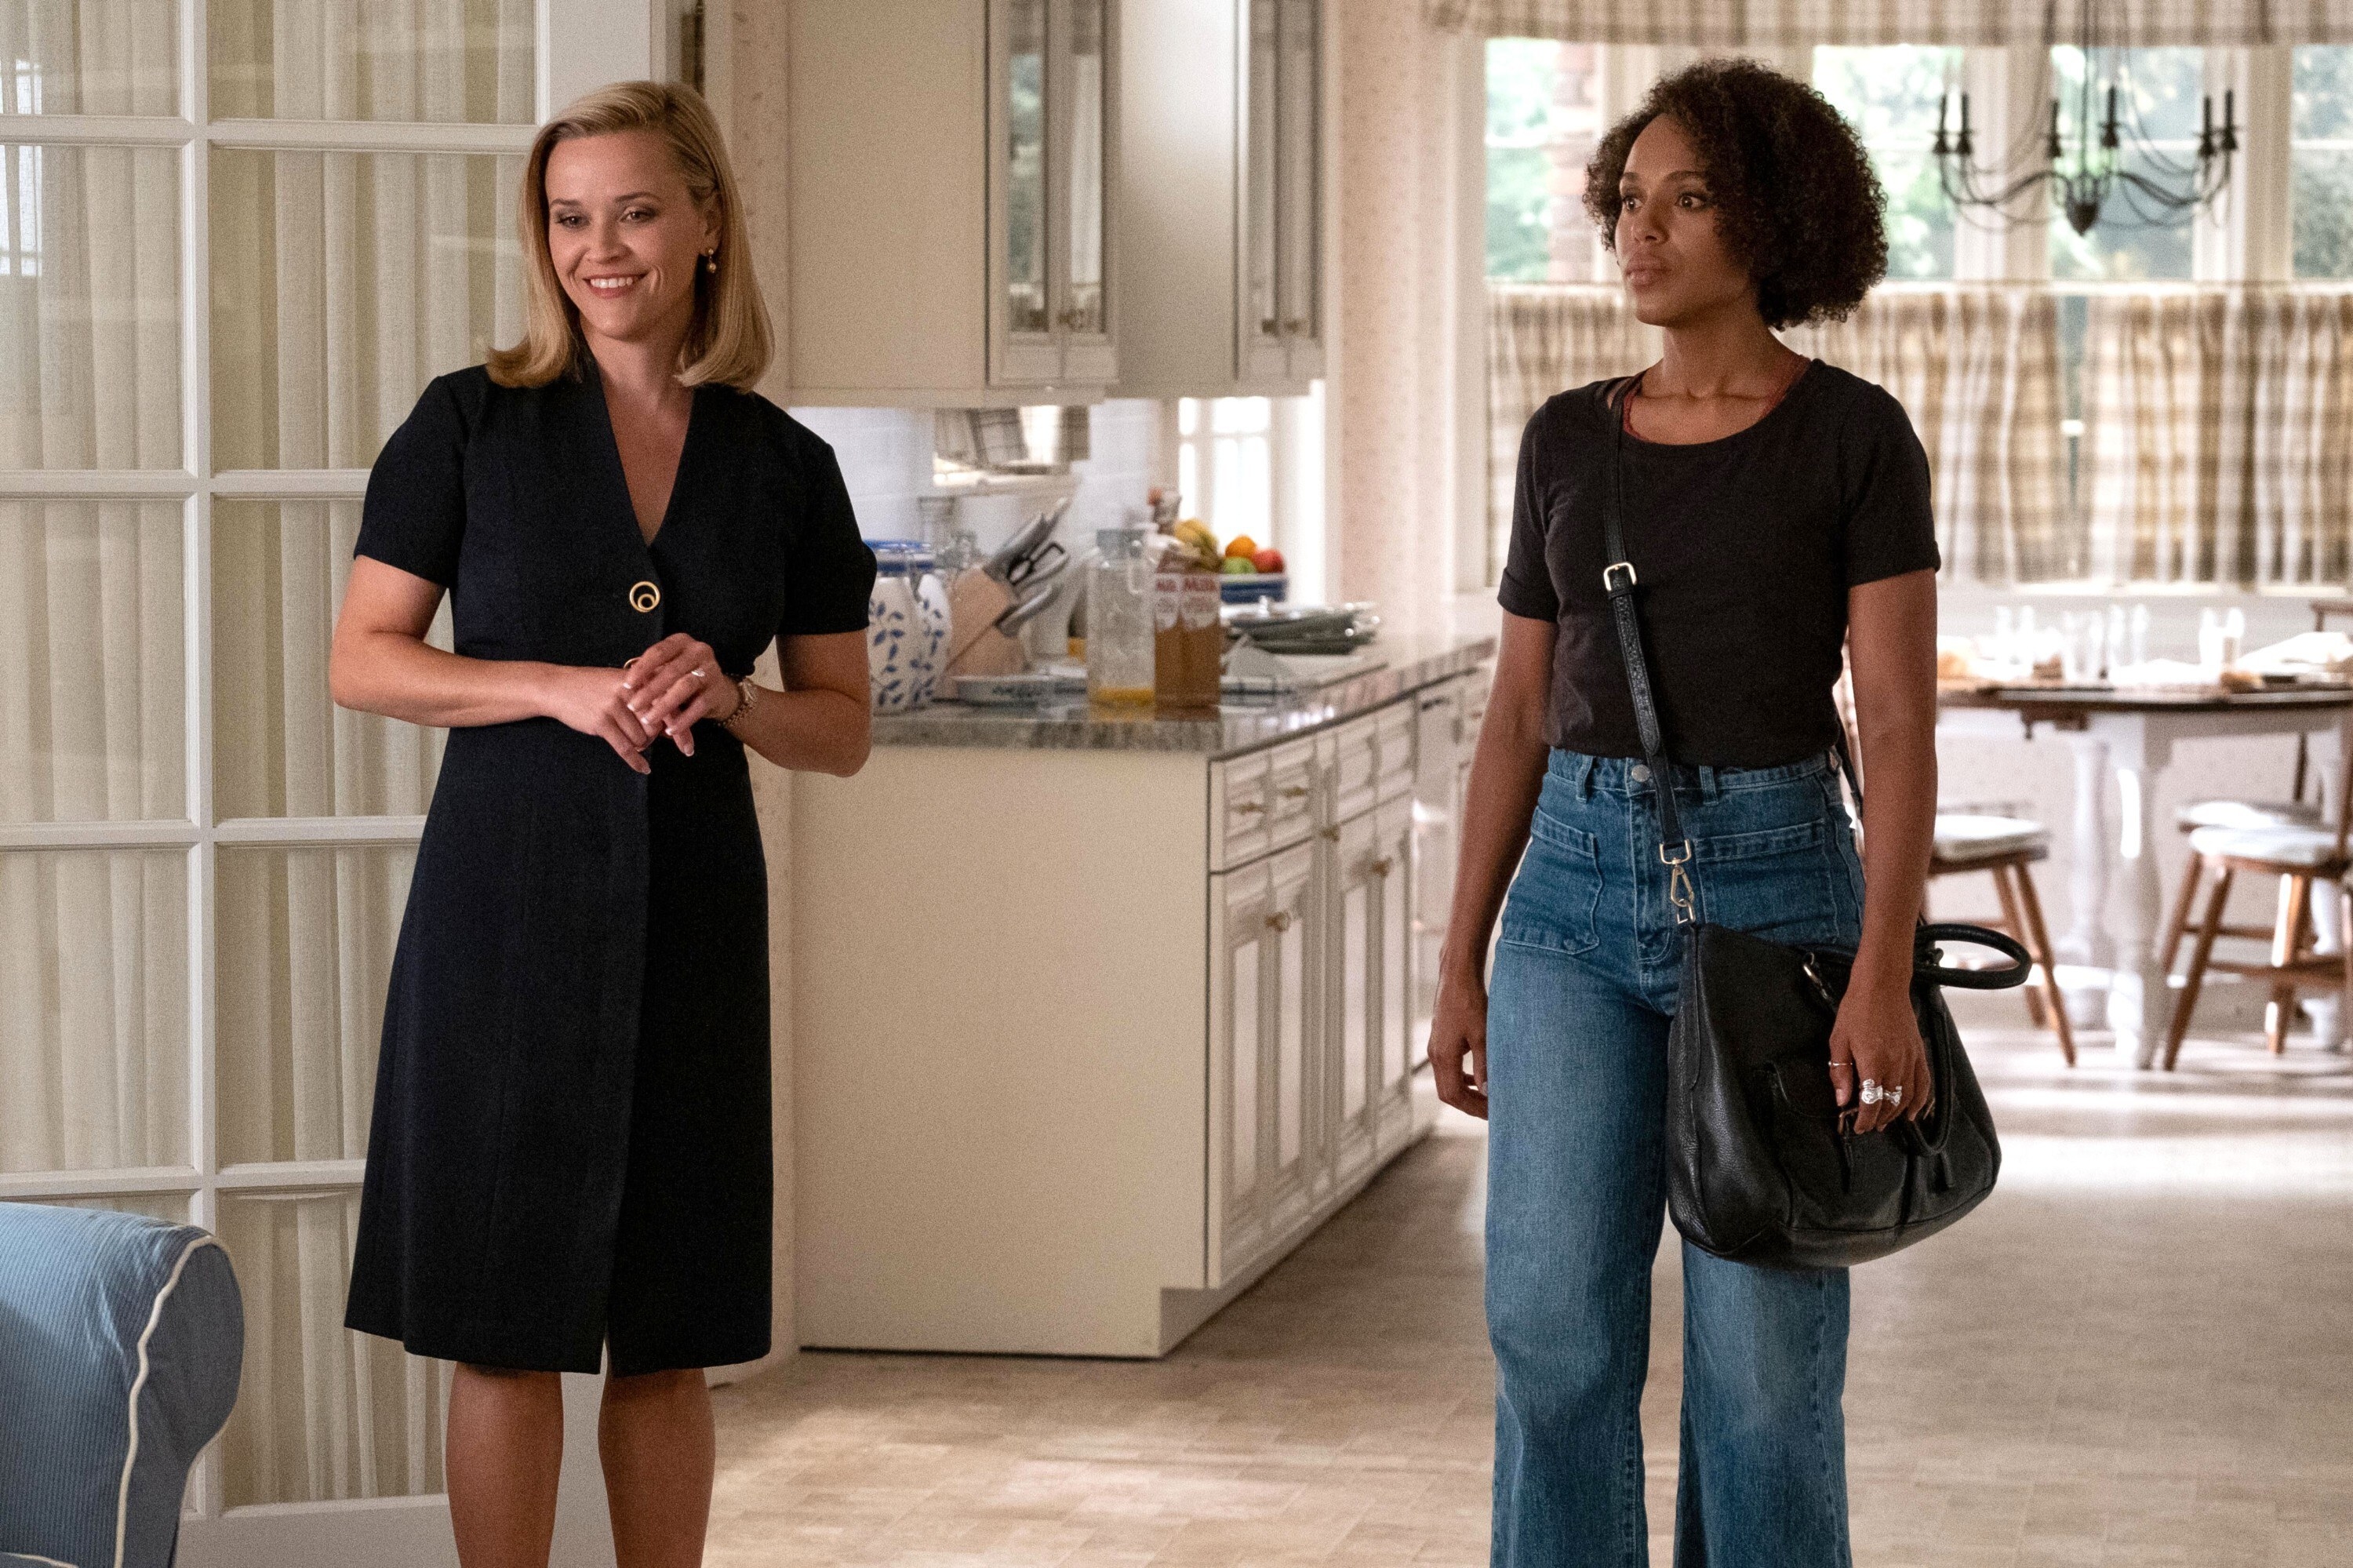 Reese Witherspoon and Kerry Washington stand in a kitchen